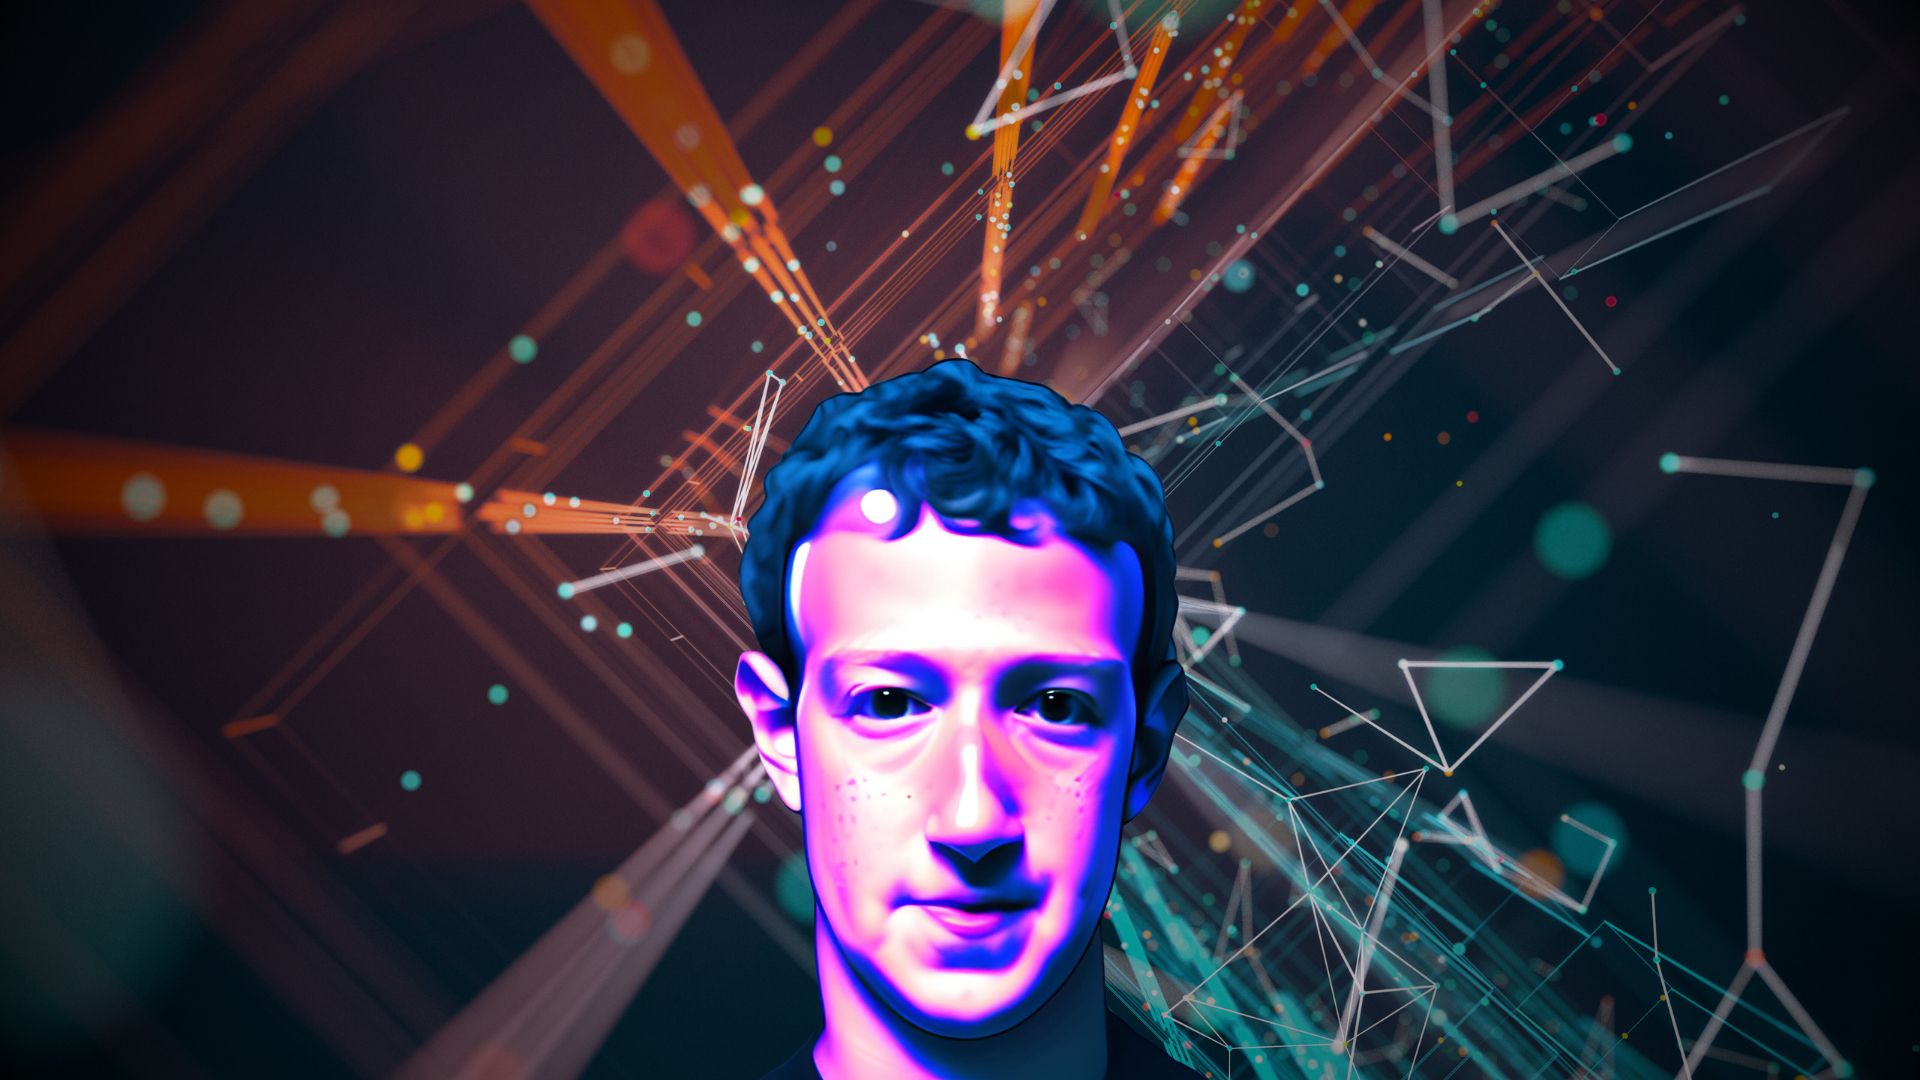 The Future of Quest and AI: A Summary of Mark Zuckerberg’s Earnings Call